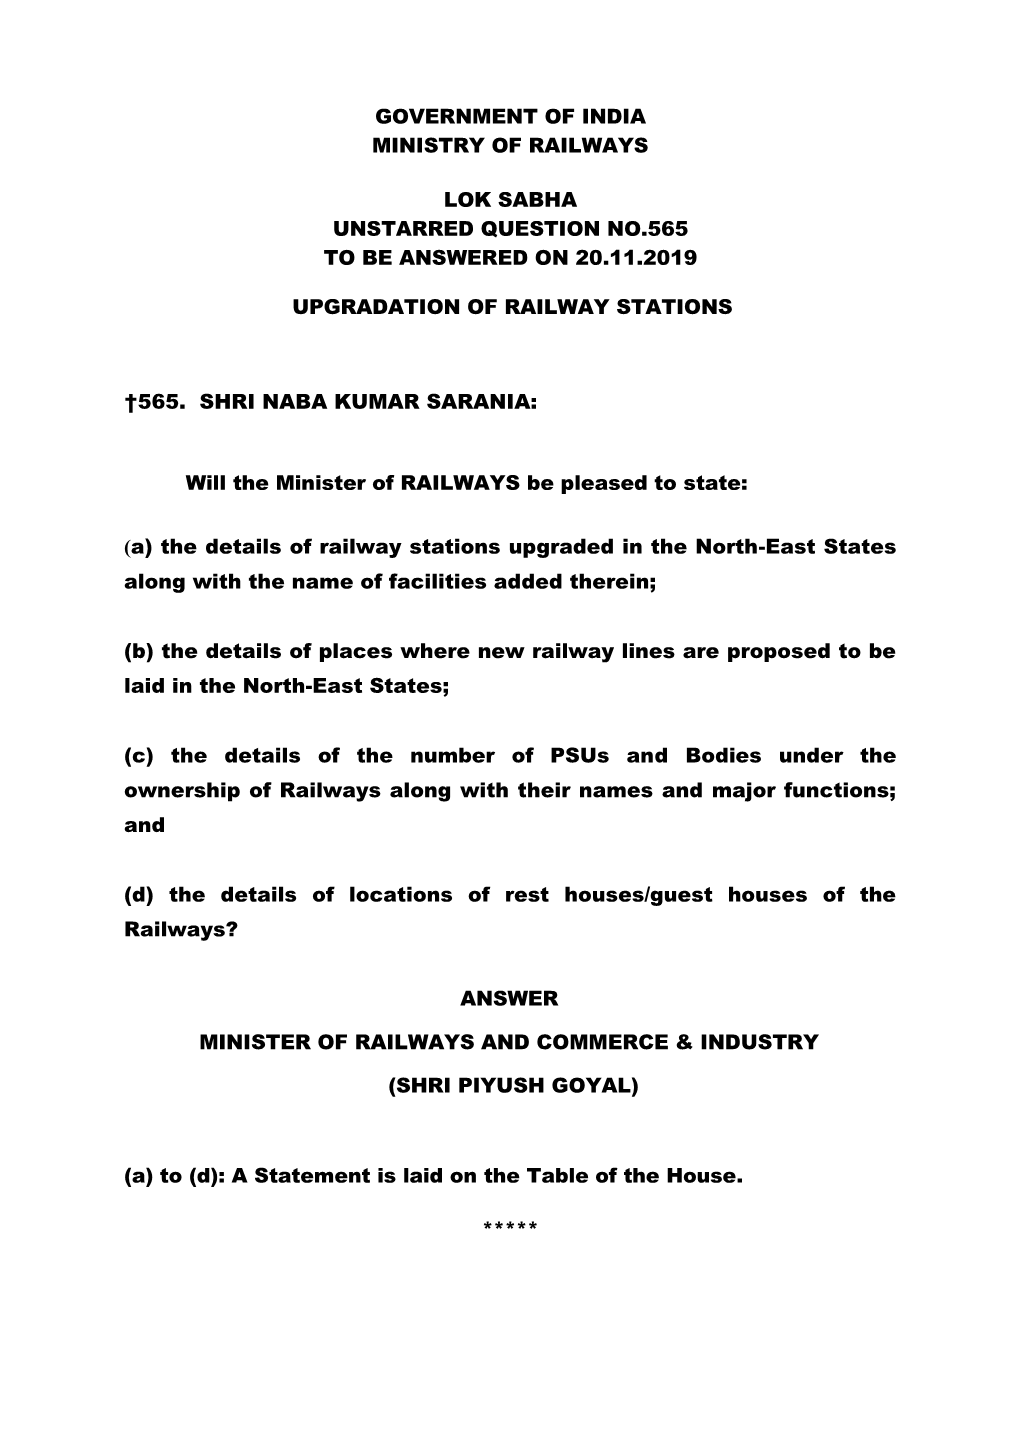 Government of India Ministry of Railways Lok Sabha Unstarred Question No.565 to Be Answered on 20.11.2019 Upgradation of Railway